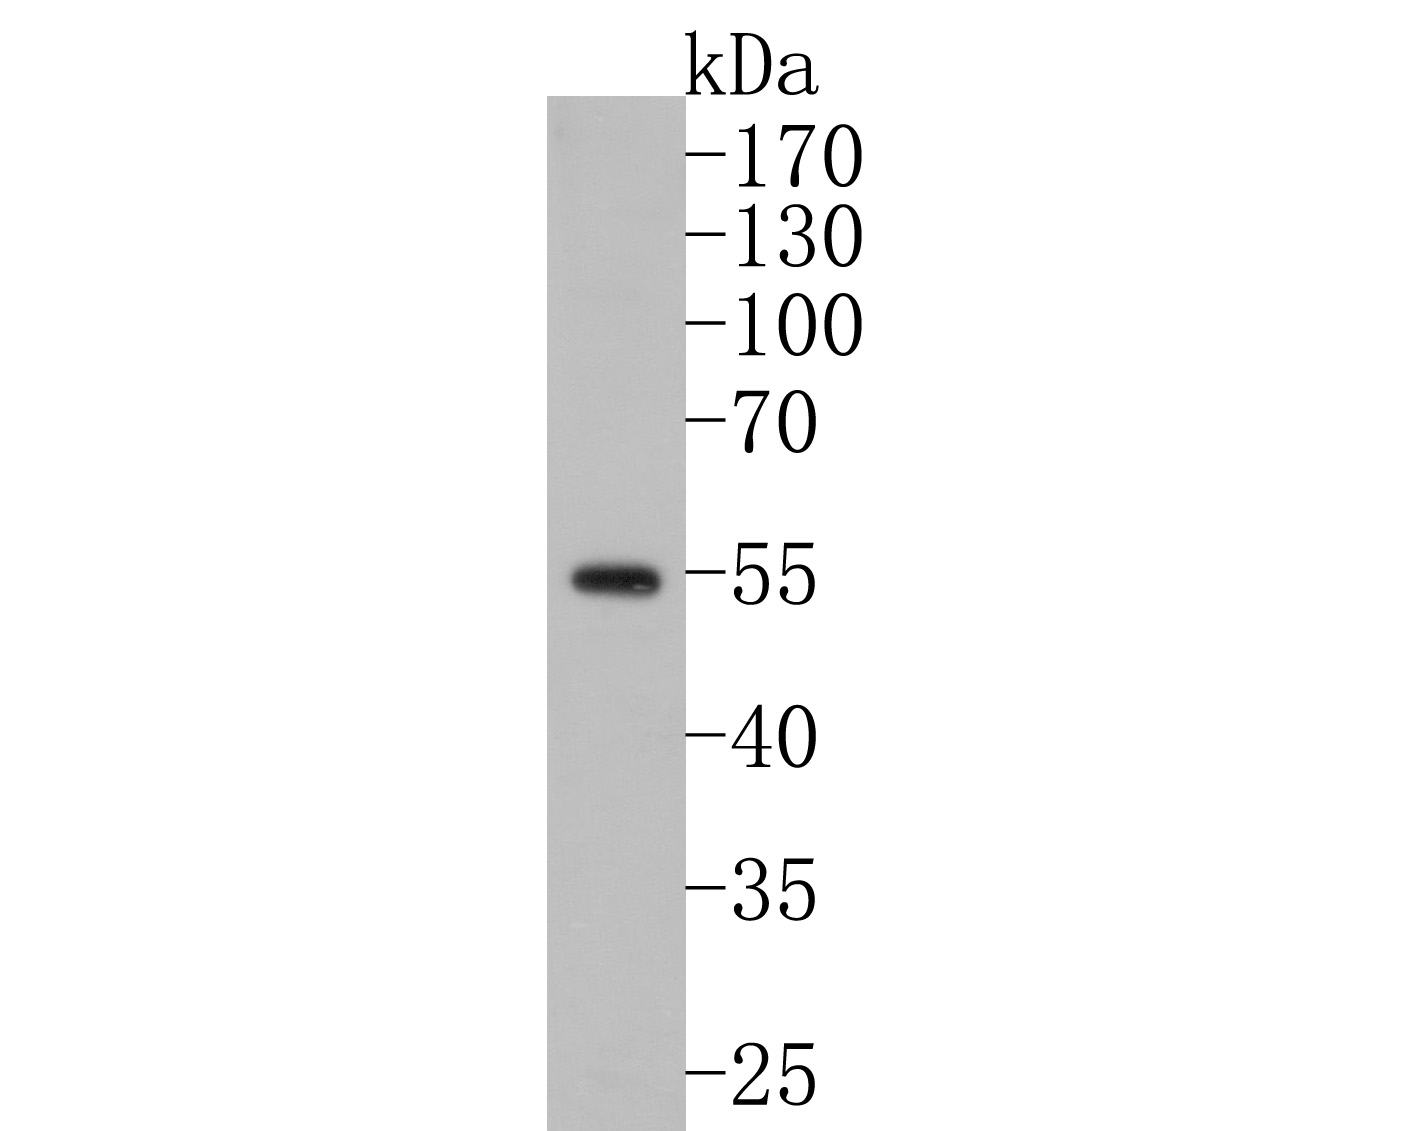 Western blot analysis of GABA A Receptor alpha 6 on rat testis tissue lysates. Proteins were transferred to a PVDF membrane and blocked with 5% NFDM/TBST for 1 hour at room temperature. The primary antibody (HA500473, 1/2,000) was used in 5% NFDM/TBST at room temperature for 2 hours. Goat Anti-Rabbit IgG - HRP Secondary Antibody (HA1001) at 1:200,000 dilution was used for 1 hour at room temperature.